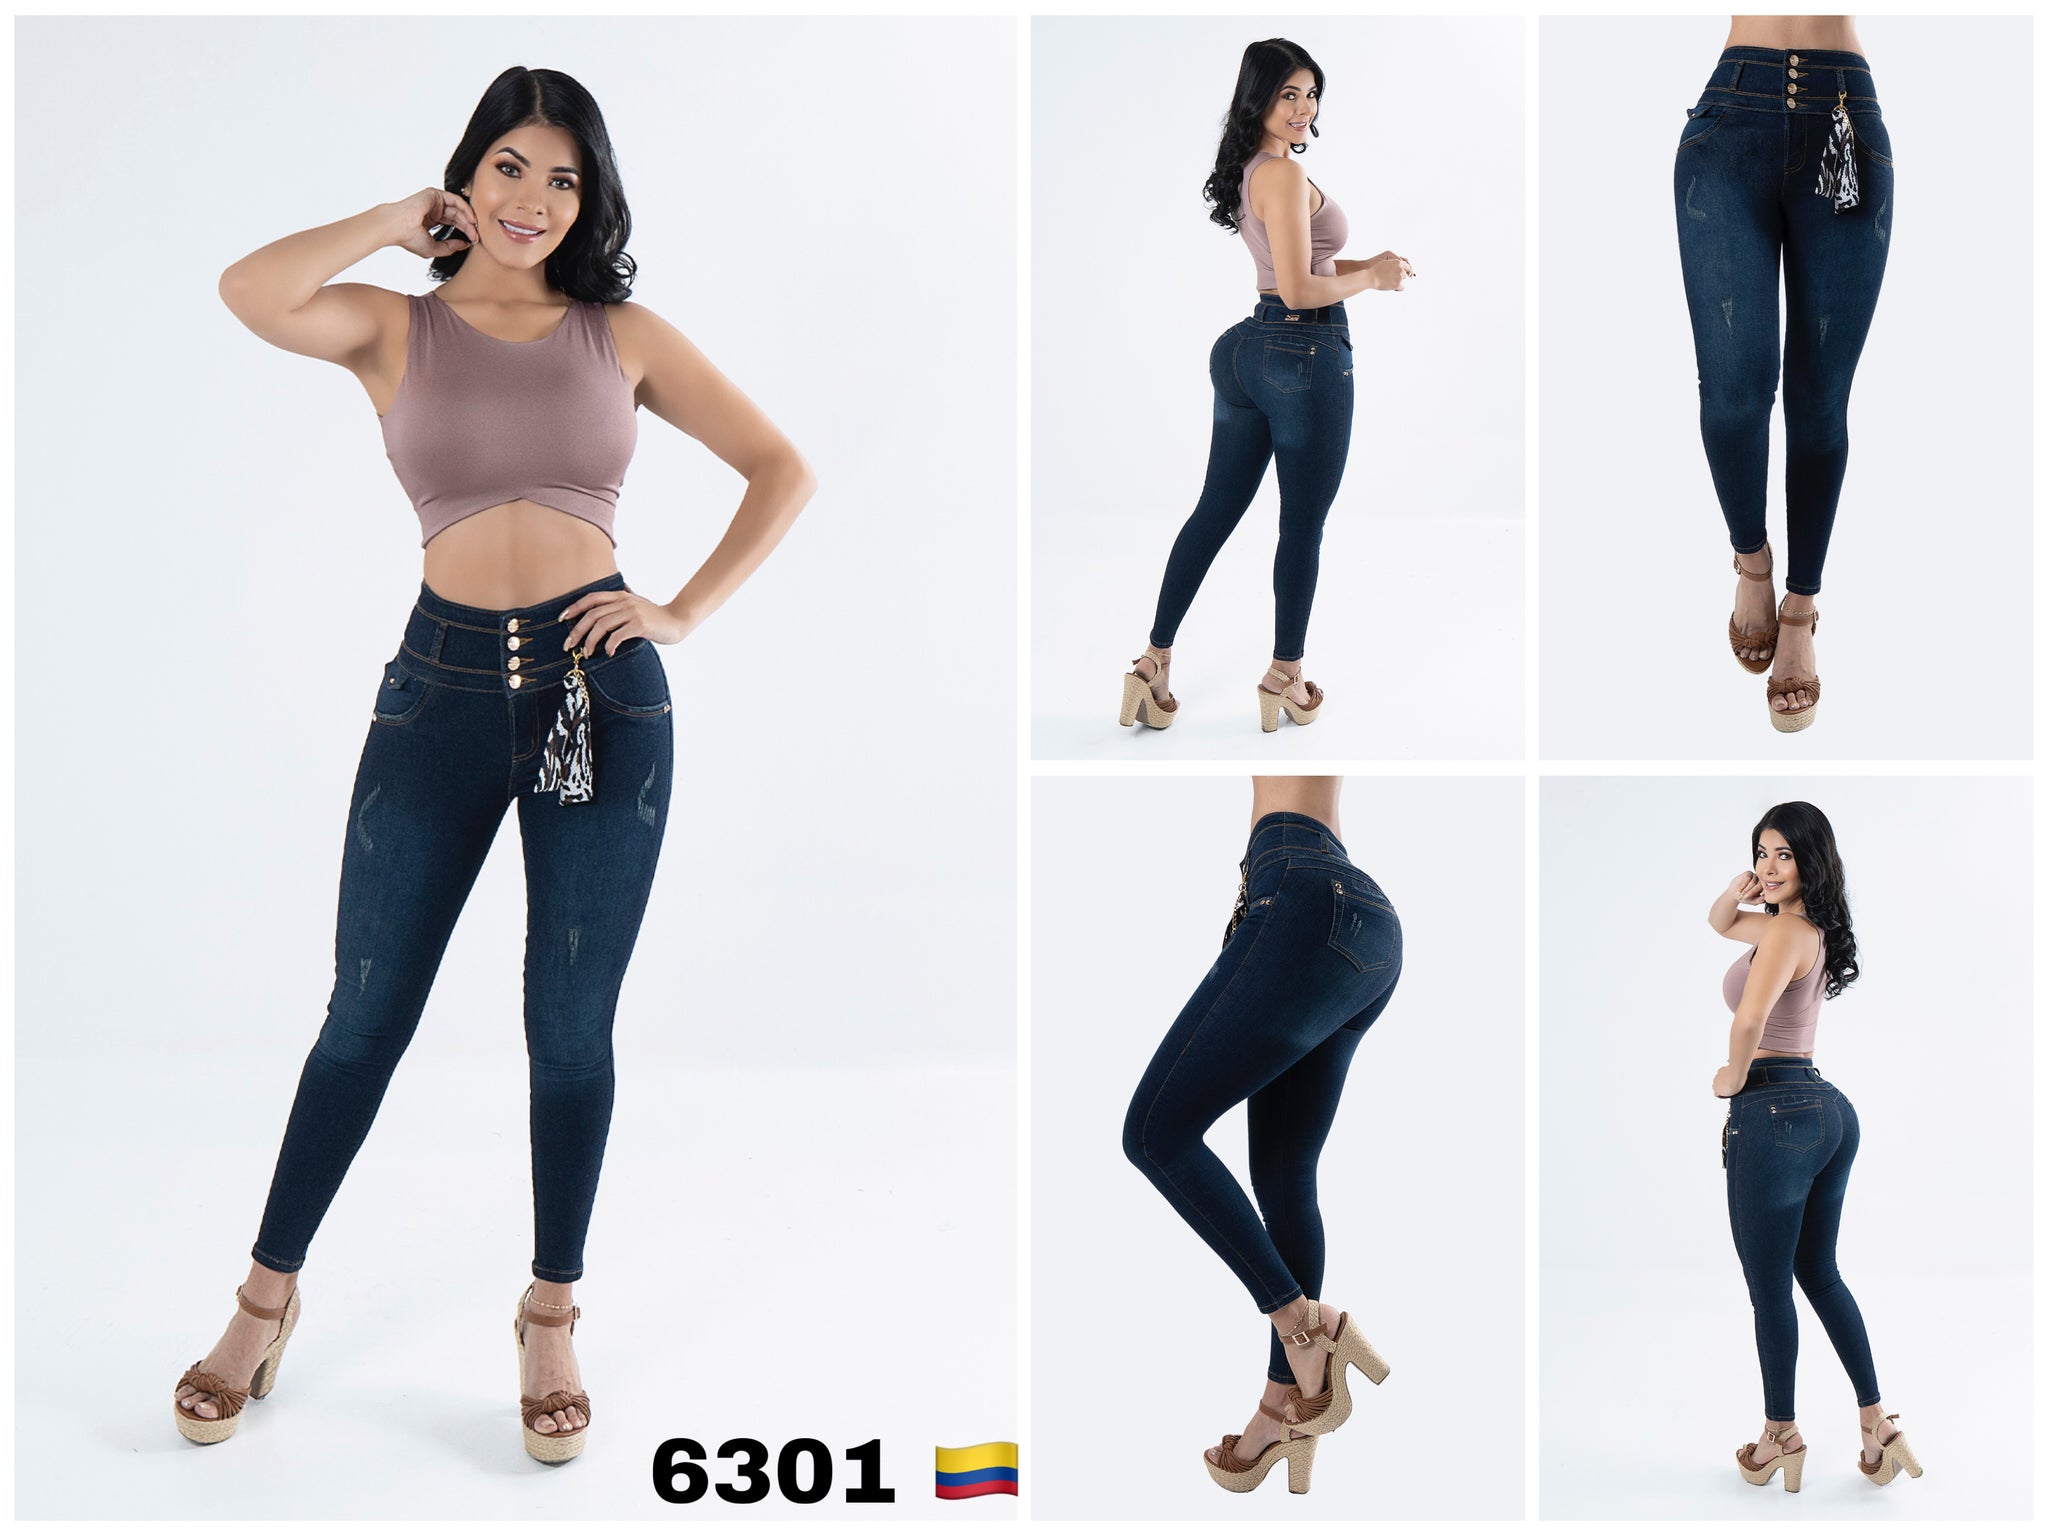 Colombianmode - Jeans colombianos, colombian jeans, jeans